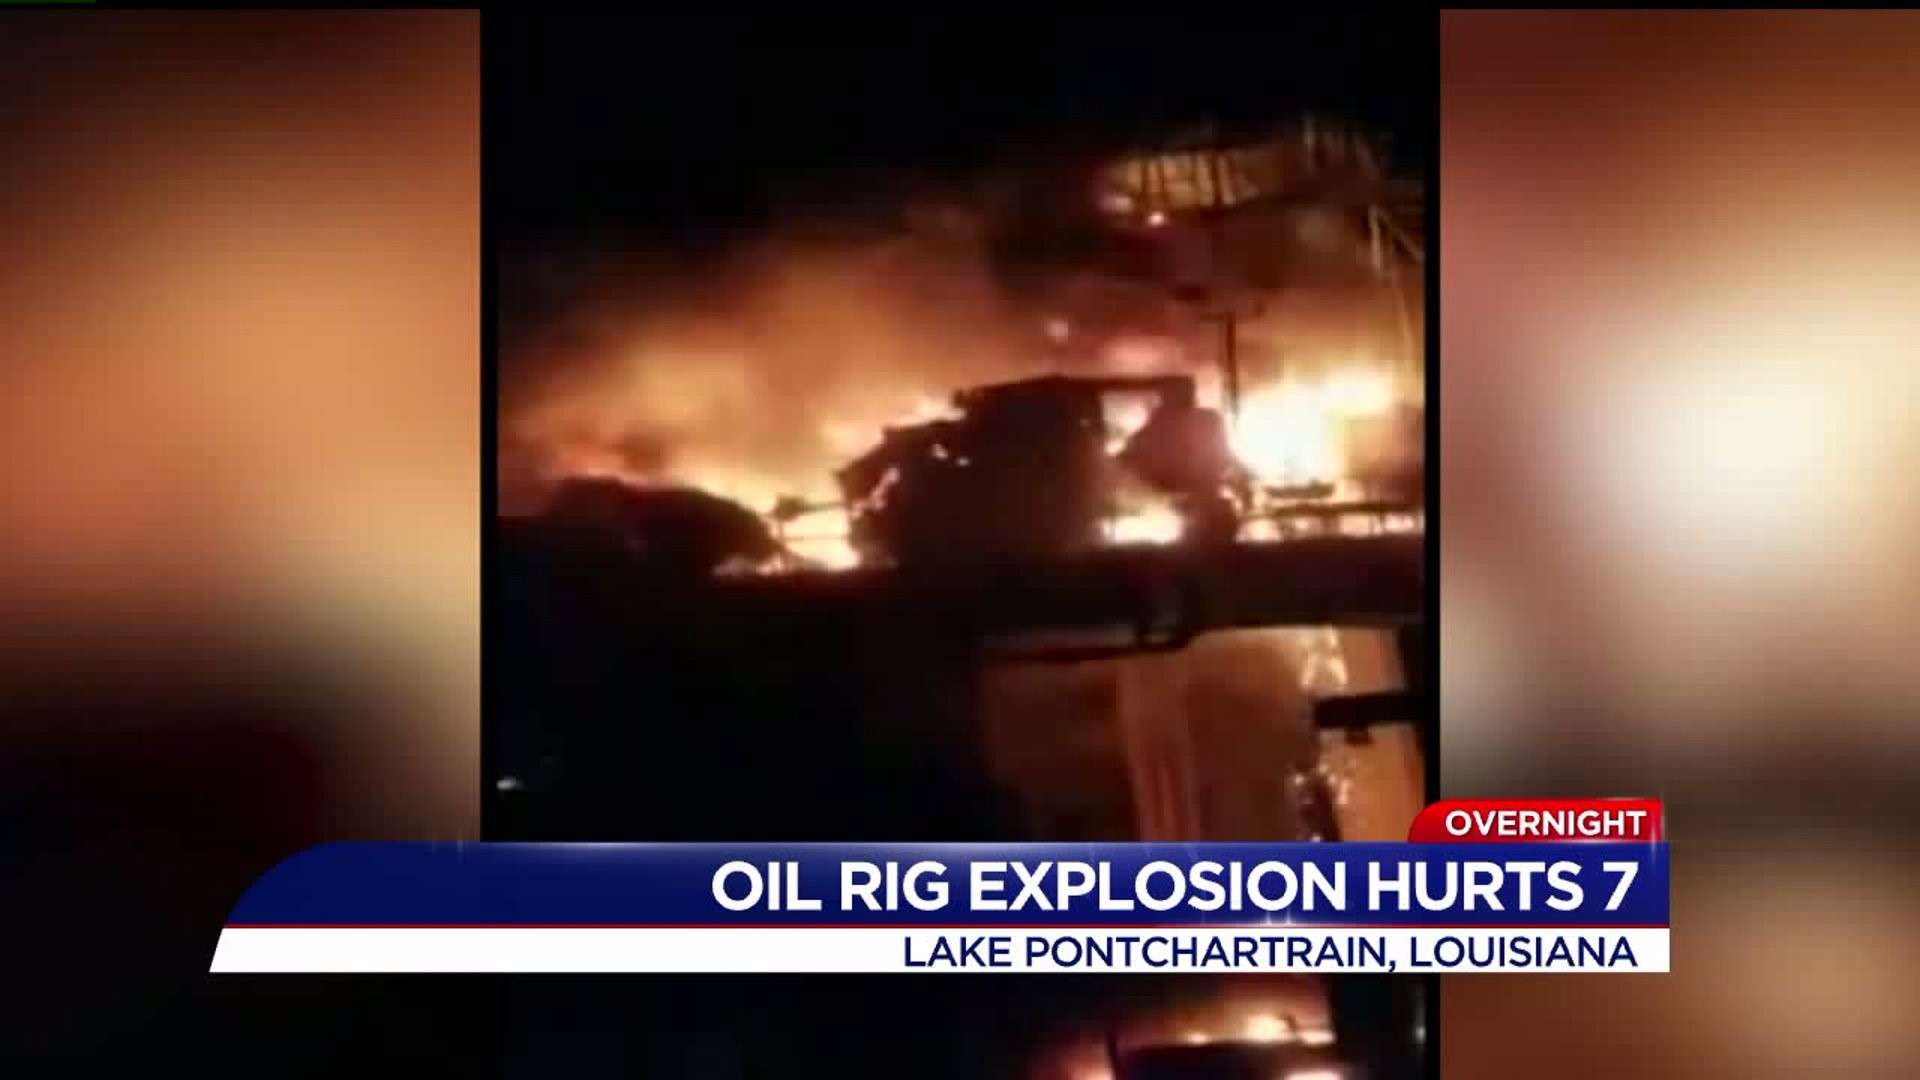 Oil rig explosion injures several people